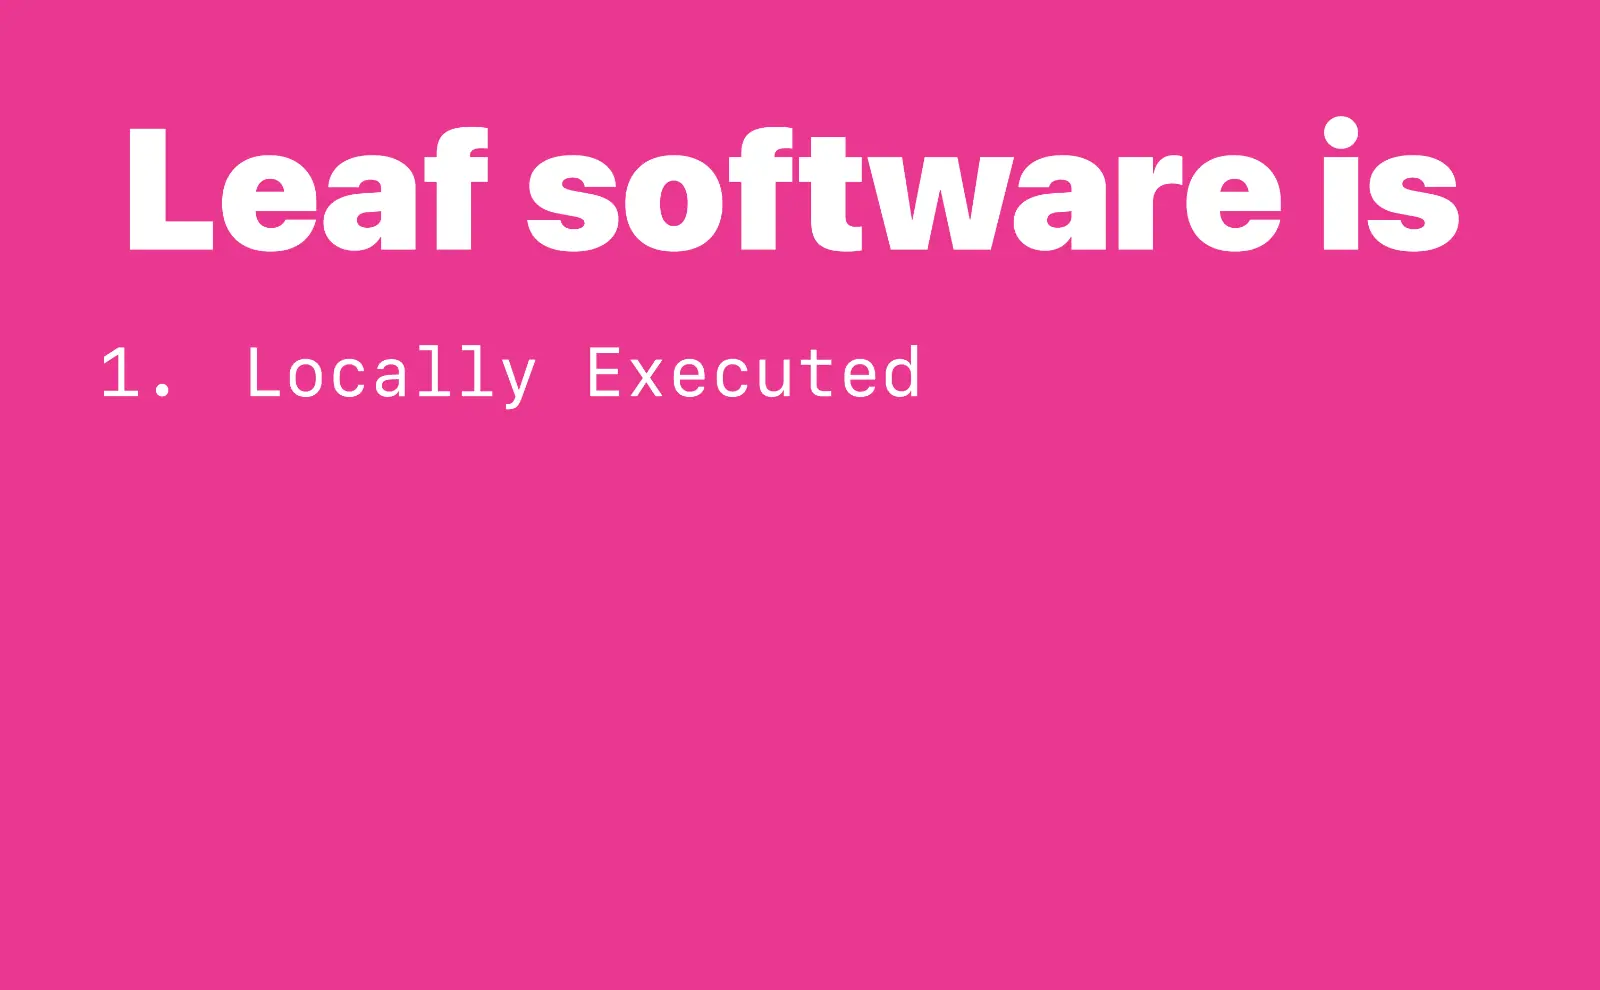 Leaf software is 1. Locally Executed